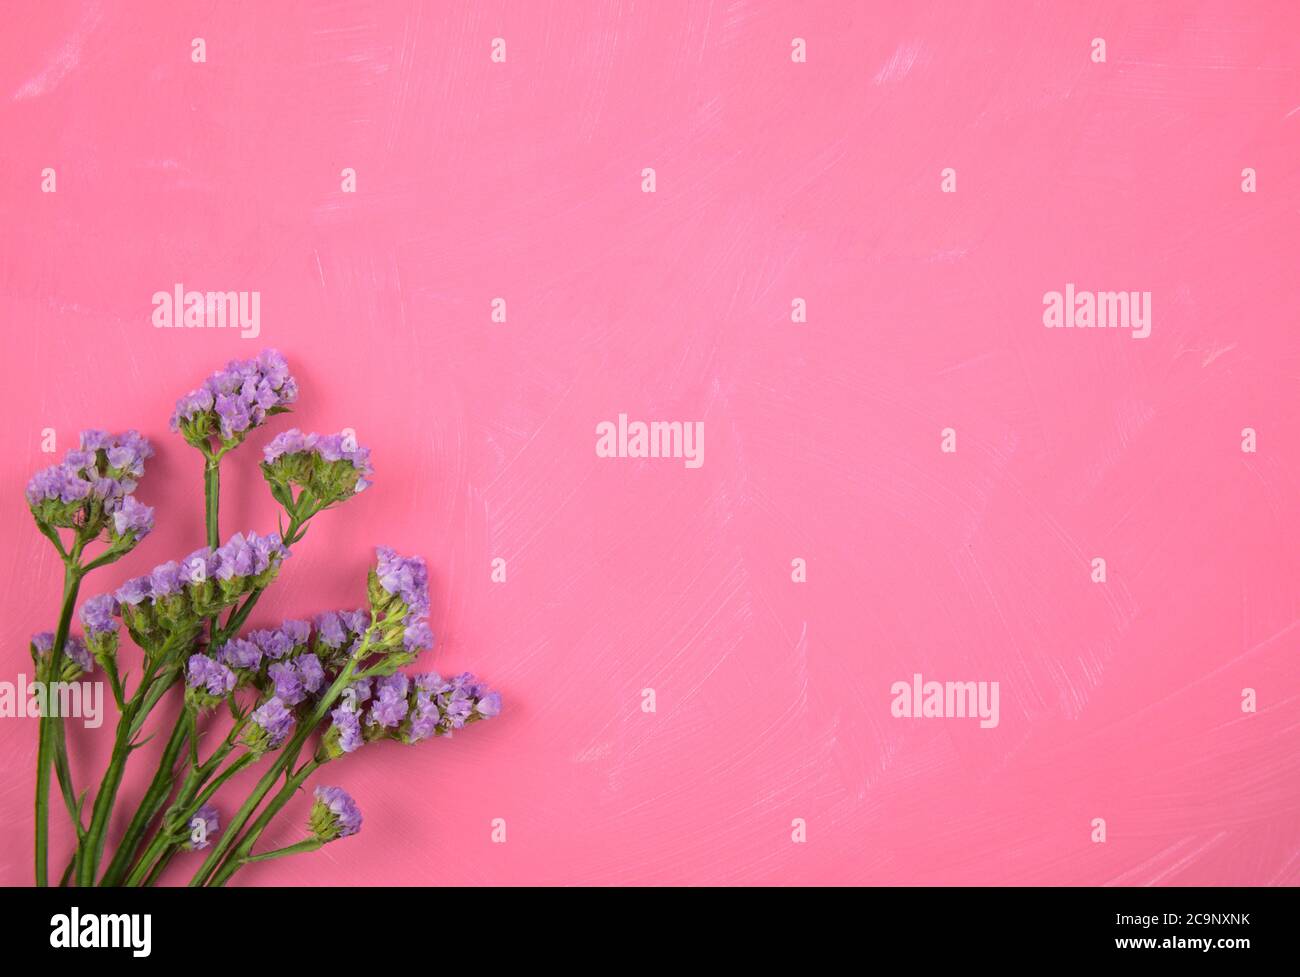 Top view of purple flowers, botany flat lay on pink grunge scratched acrylic painted canvas texture background. For your mockup, overlay, congratulate. Stock Photo